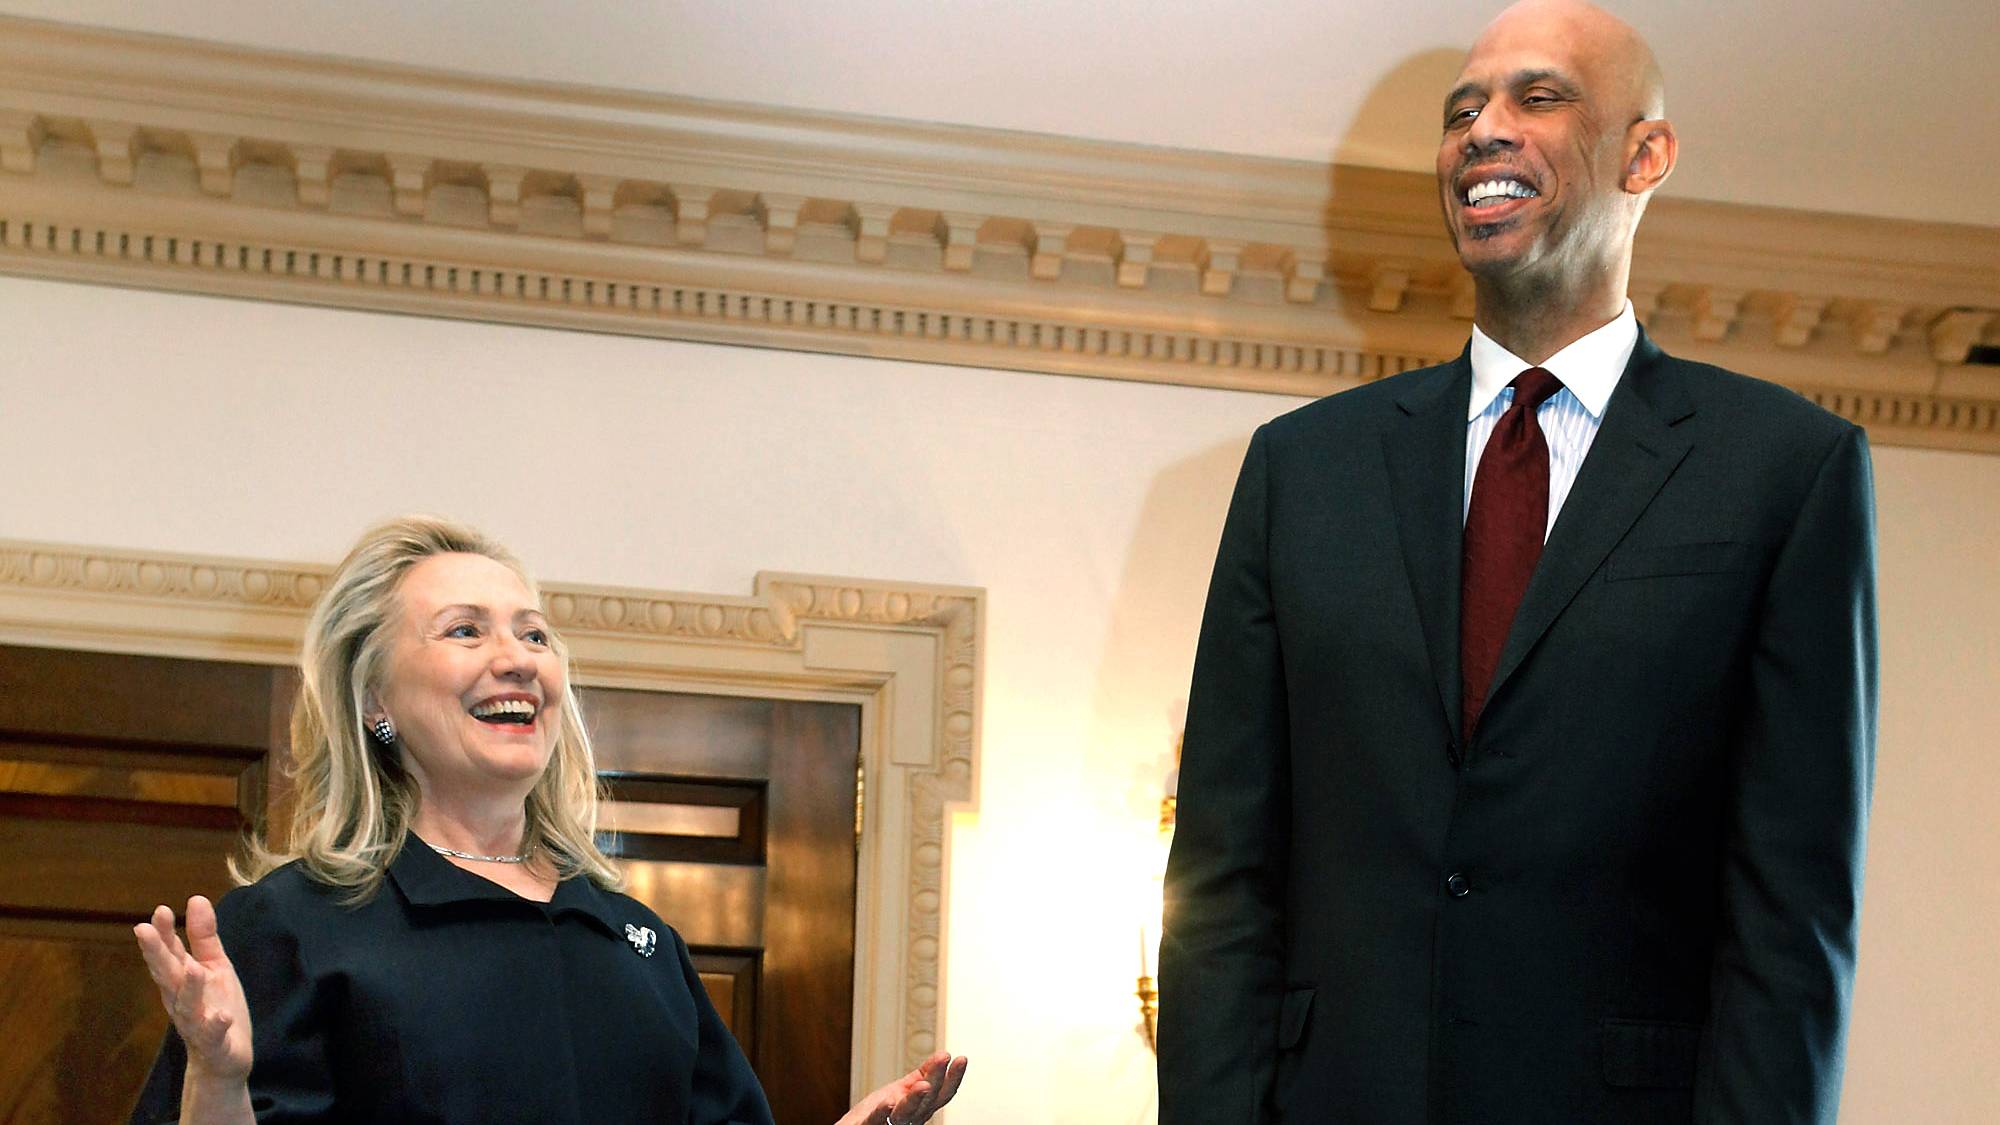 Kareem Abdul-Jabbar Appointed Cultural Ambassador by Hillary Clinton - Kareem Abdul-Jabbar, one of the all-time greats of American basketball, has been cast in a new role, having been named as an American cultural ambassador by Secretary of State&nbsp;Hillary Rodham Clinton. In that capacity, Abdul-Jabbar will represent the United States abroad in an effort to engage young people to help promote democracy.&nbsp;&nbsp;(Photo: Chip Somodevilla/Getty Images)